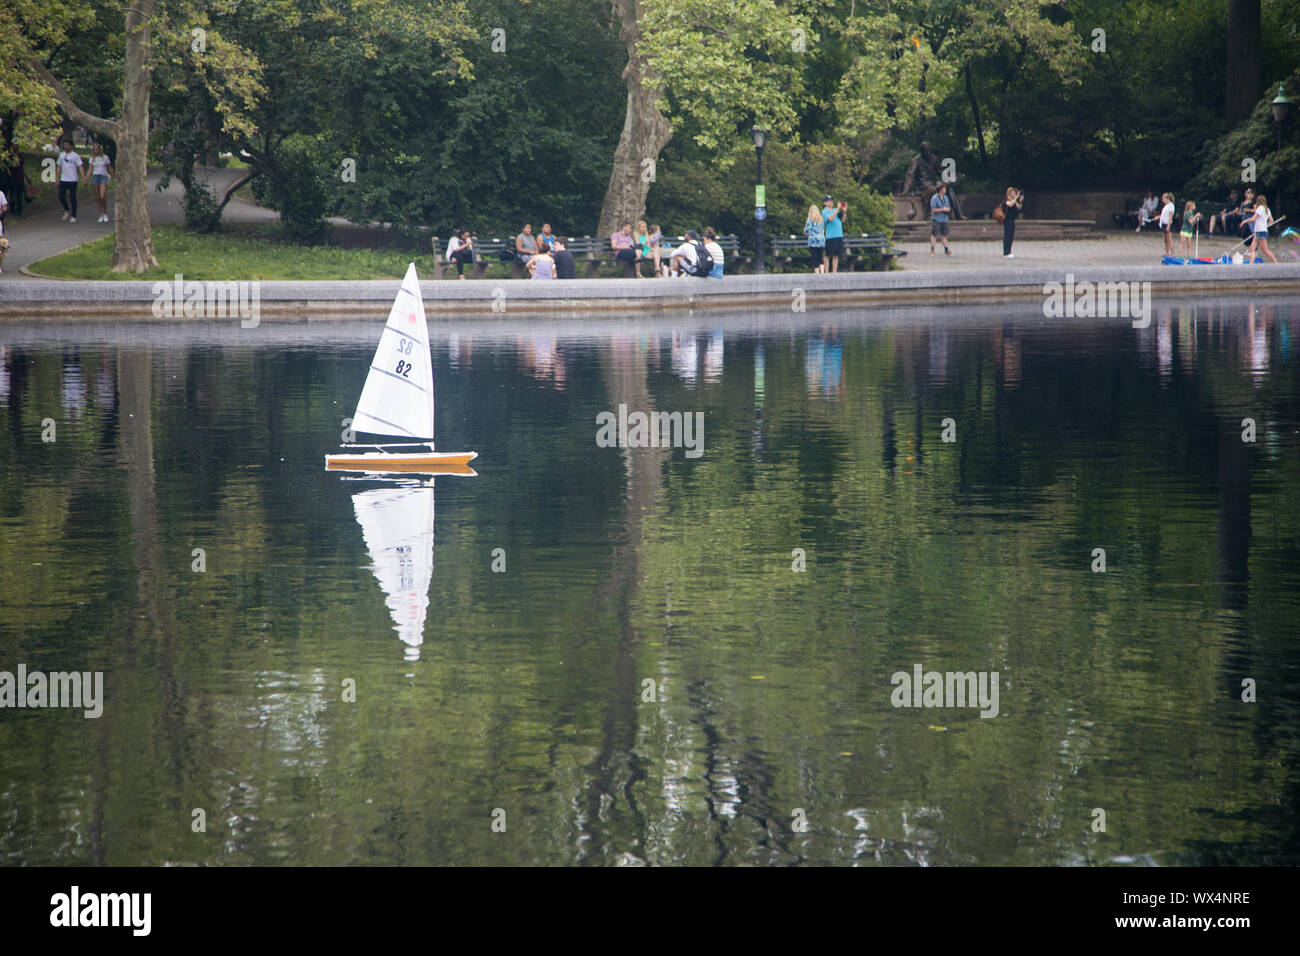 New York, USA - June 16th 2019: Model boat sailing in Central Park, Manhattan Stock Photo